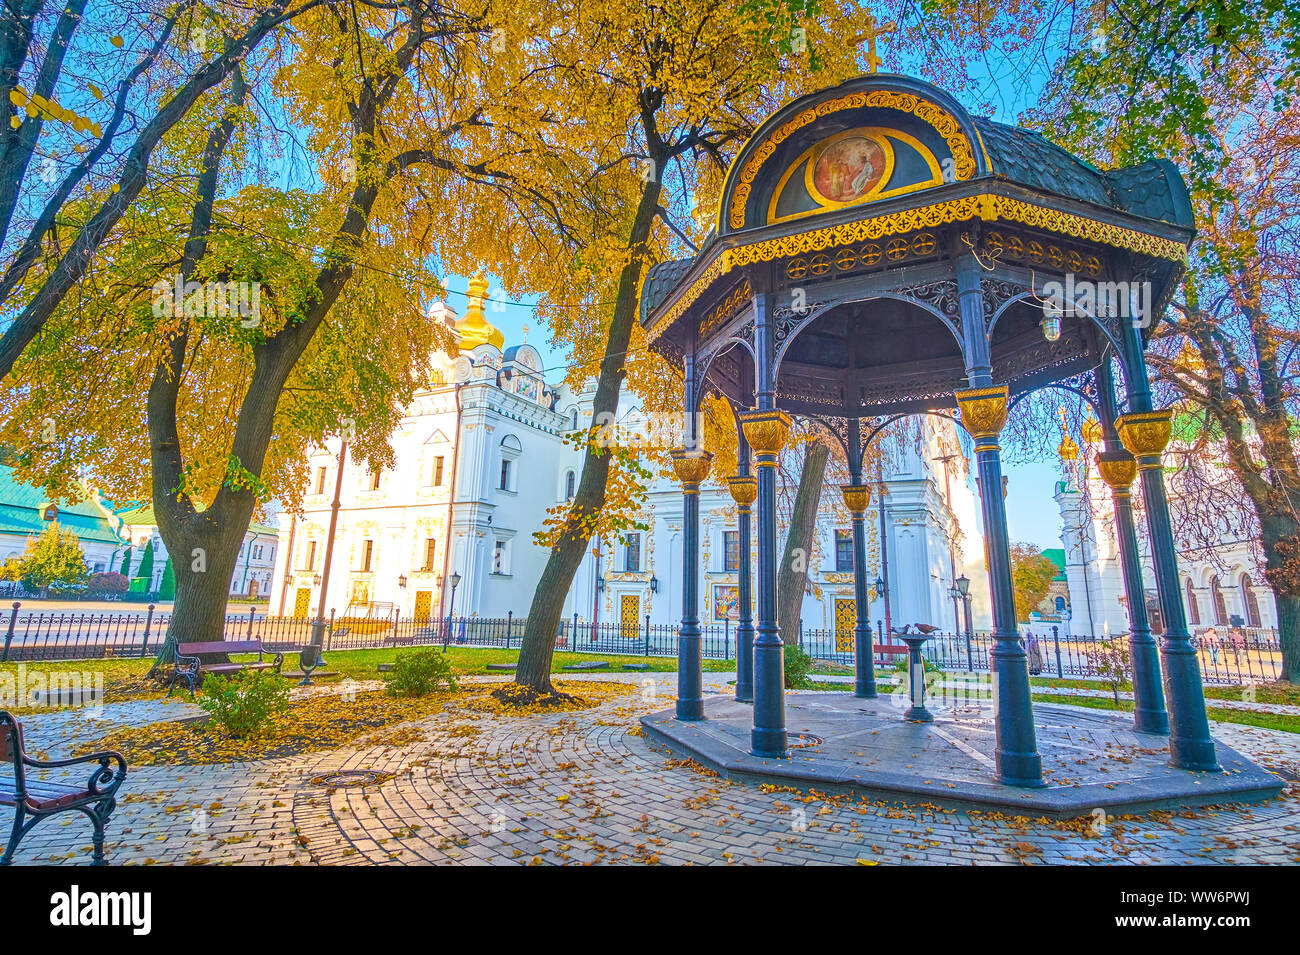 The scenic metal alcove with the drinking fountain locate din the courtyard of Kiev Pechersk Lavra, Ukraine Stock Photo